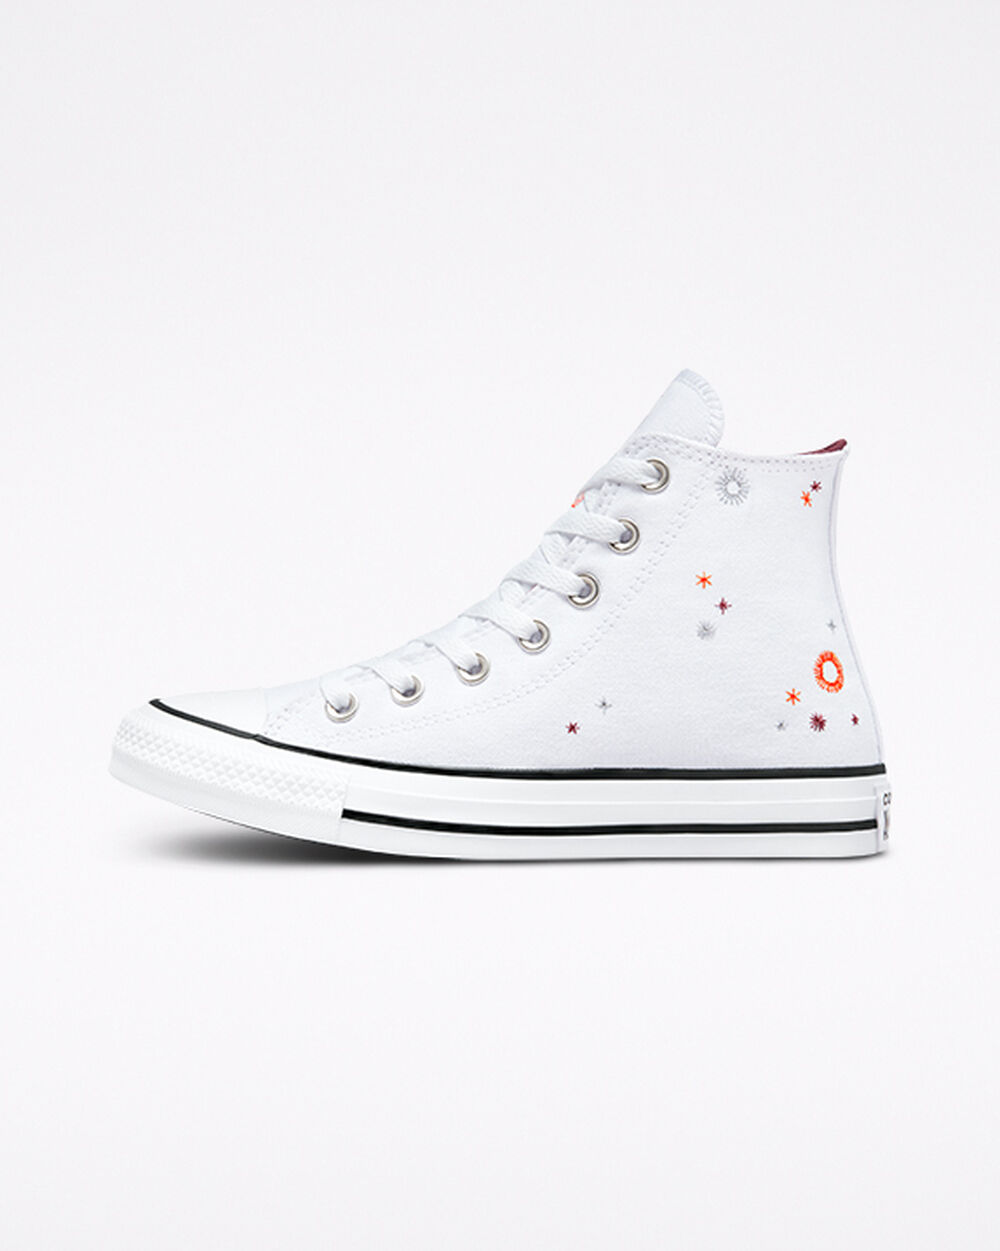 Tenis Converse Chuck Taylor All Star Mujer Blancos | Mexico-823756